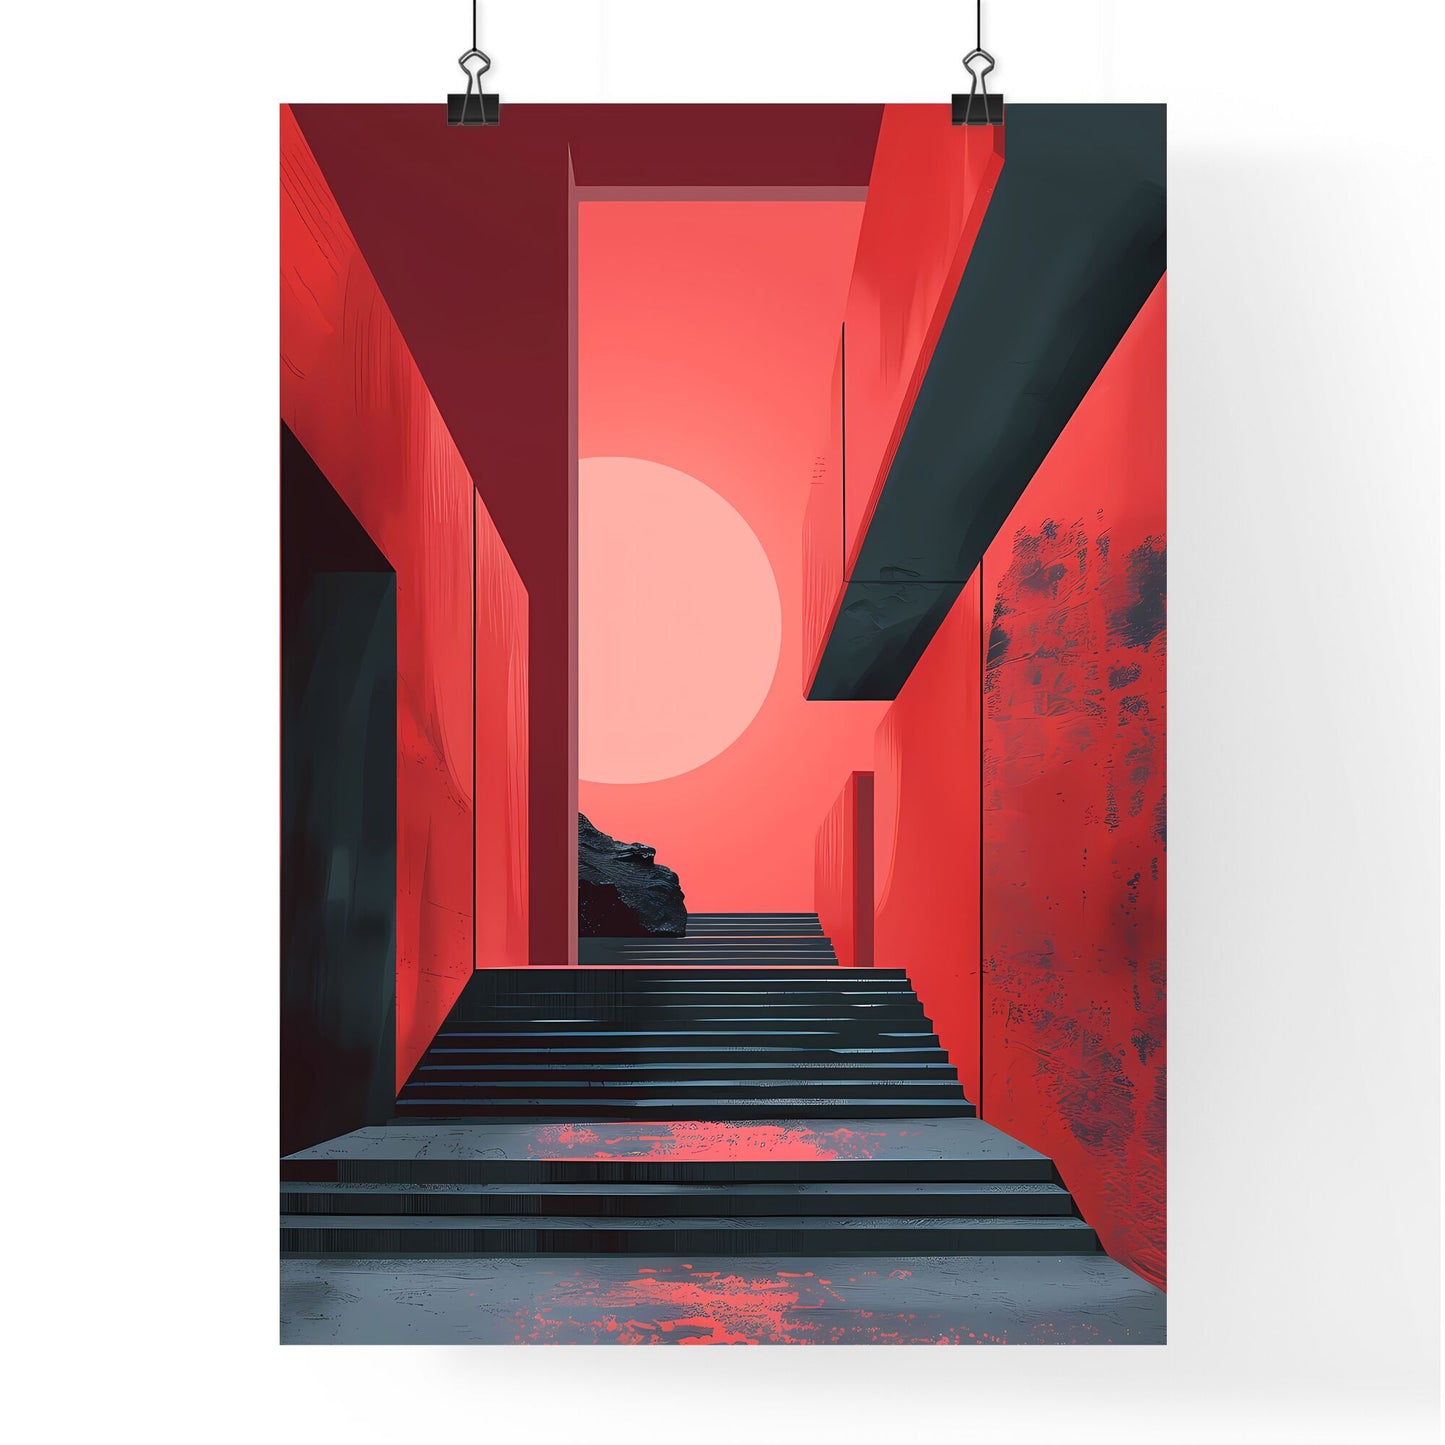 Minimalist Brutalism Art: Vibrant Red and Black Stairway Painting, Abstract Contemporary Artwork Default Title